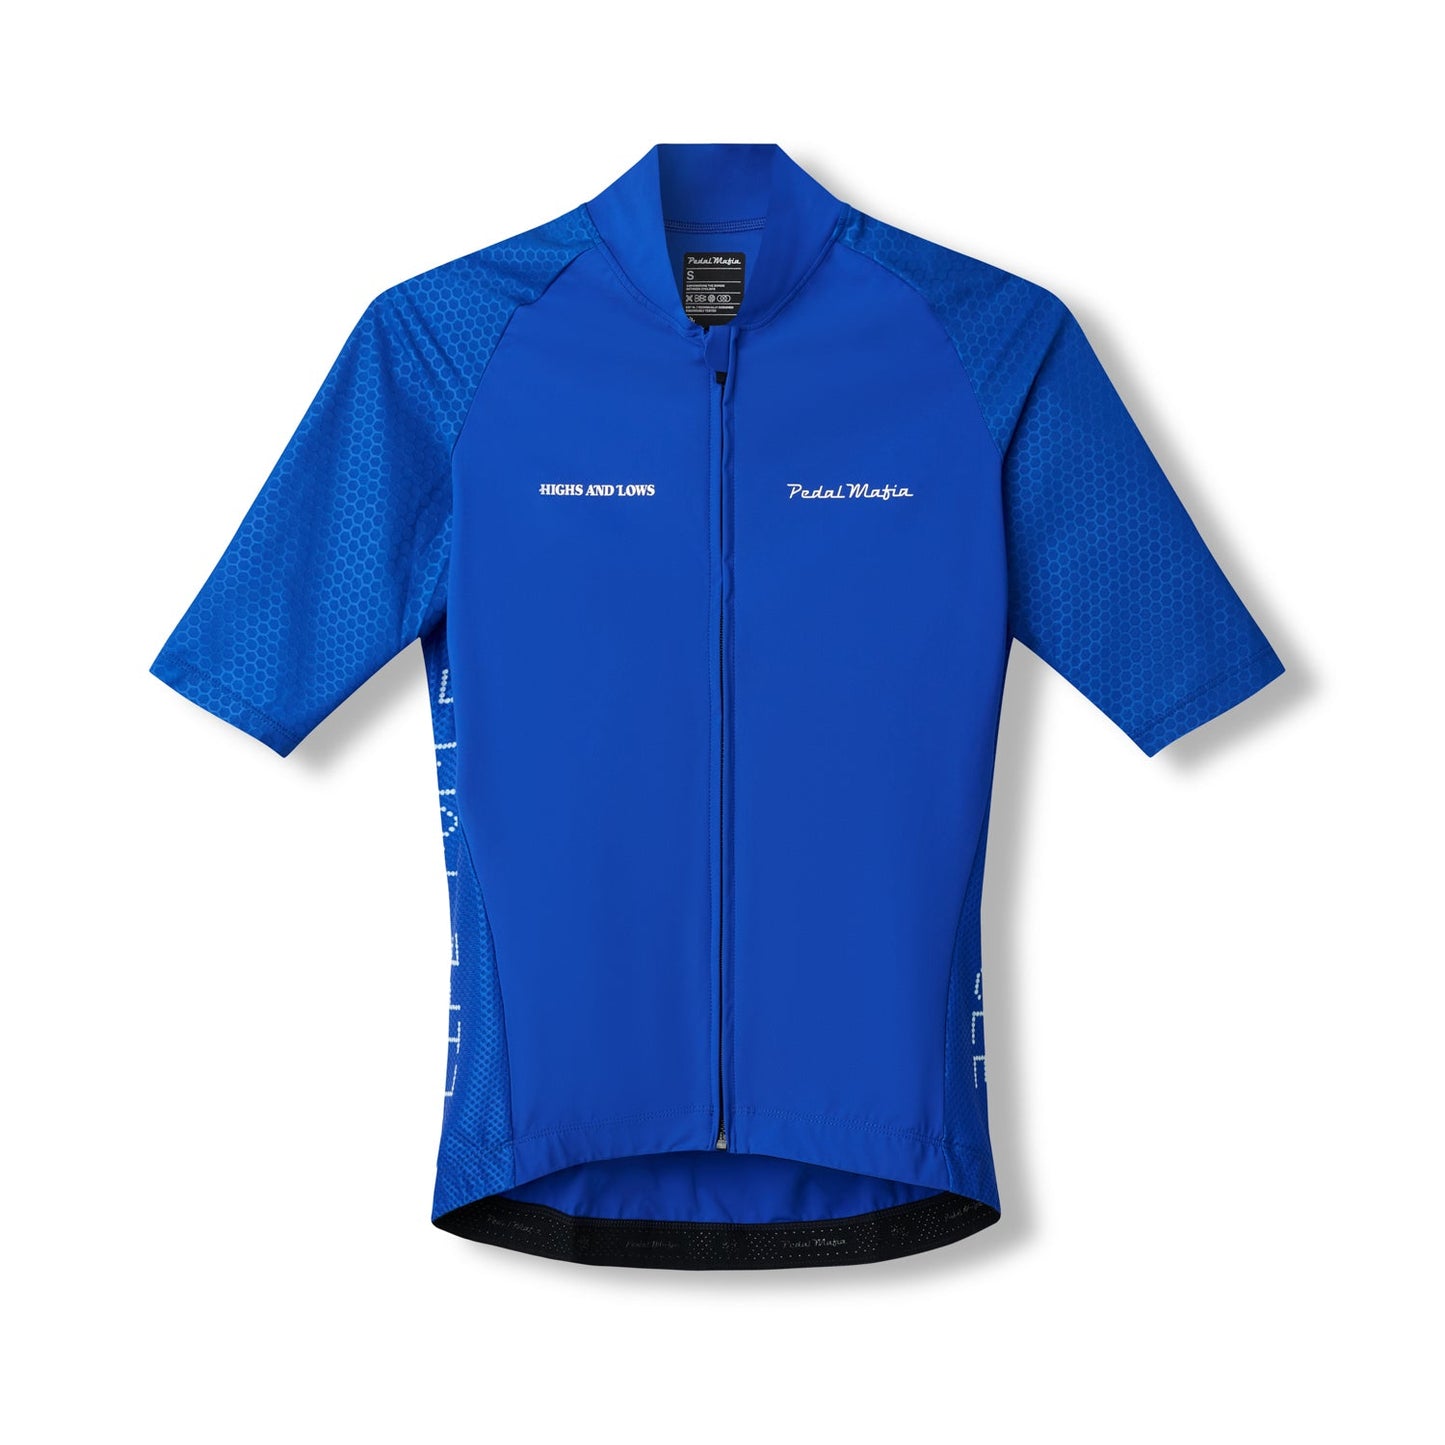 Women's Pro Jersey - Life Cycle Blue